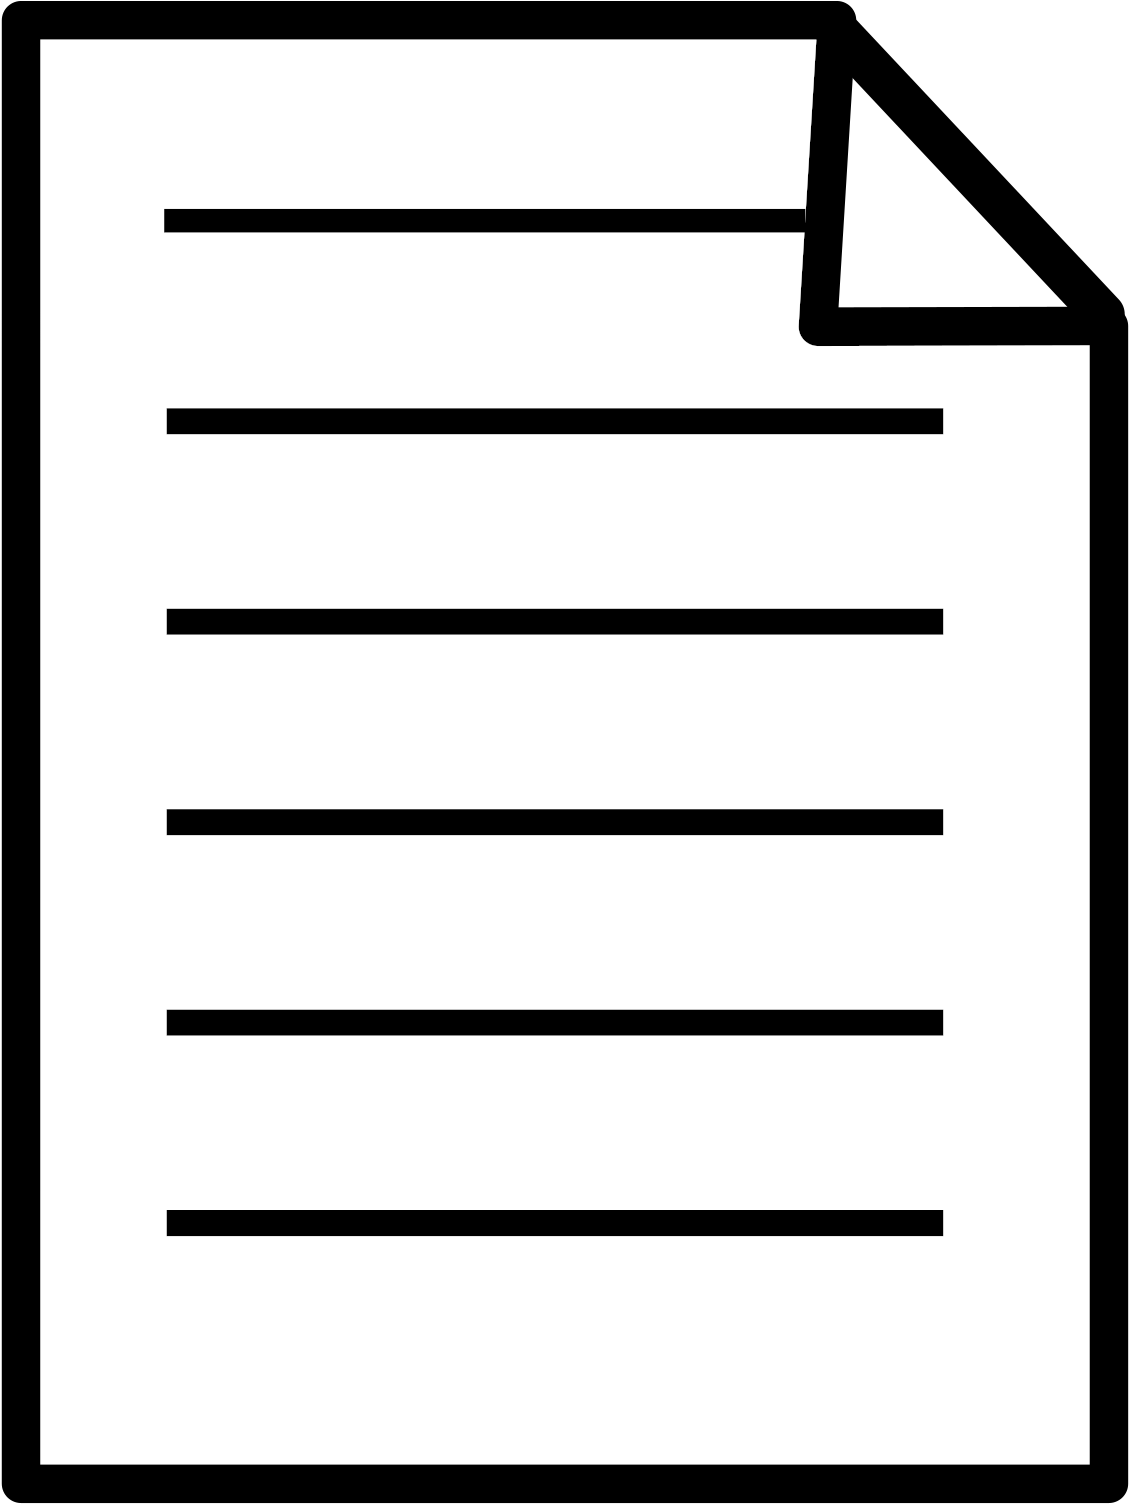 Blank Document Icon PNG